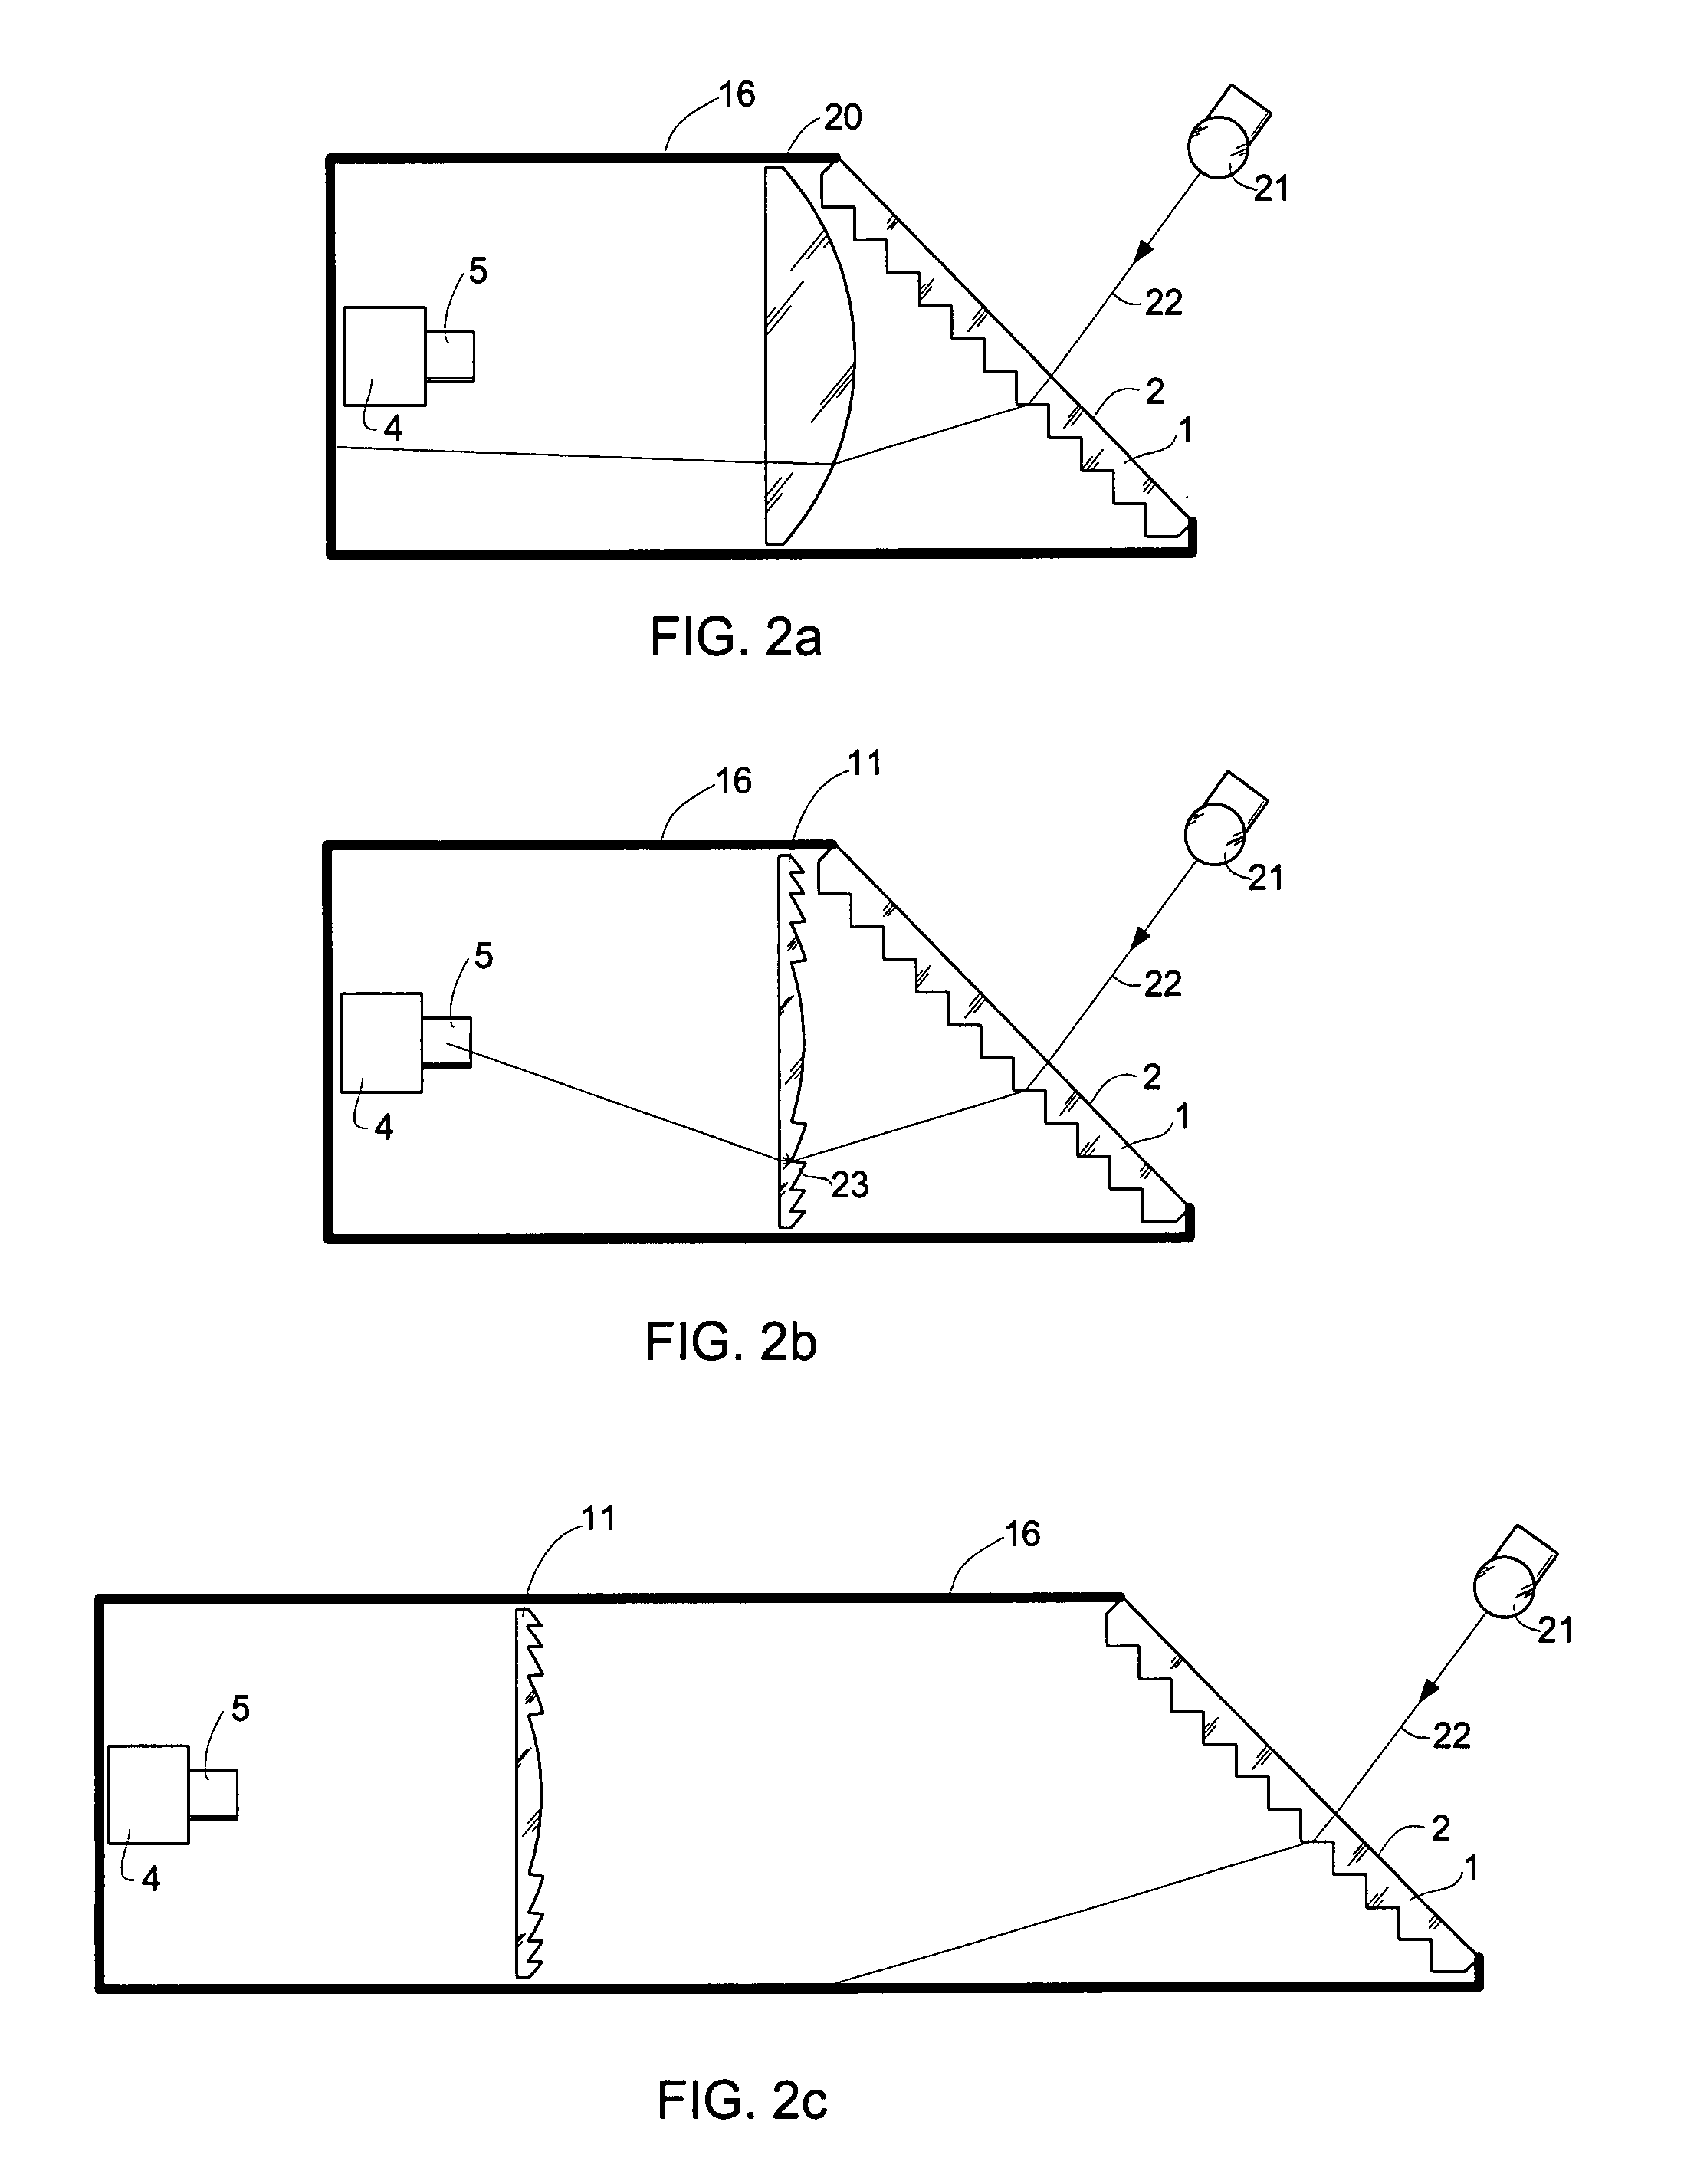 Low-cost graphic input device with uniform sensitivity and no keystone distortion